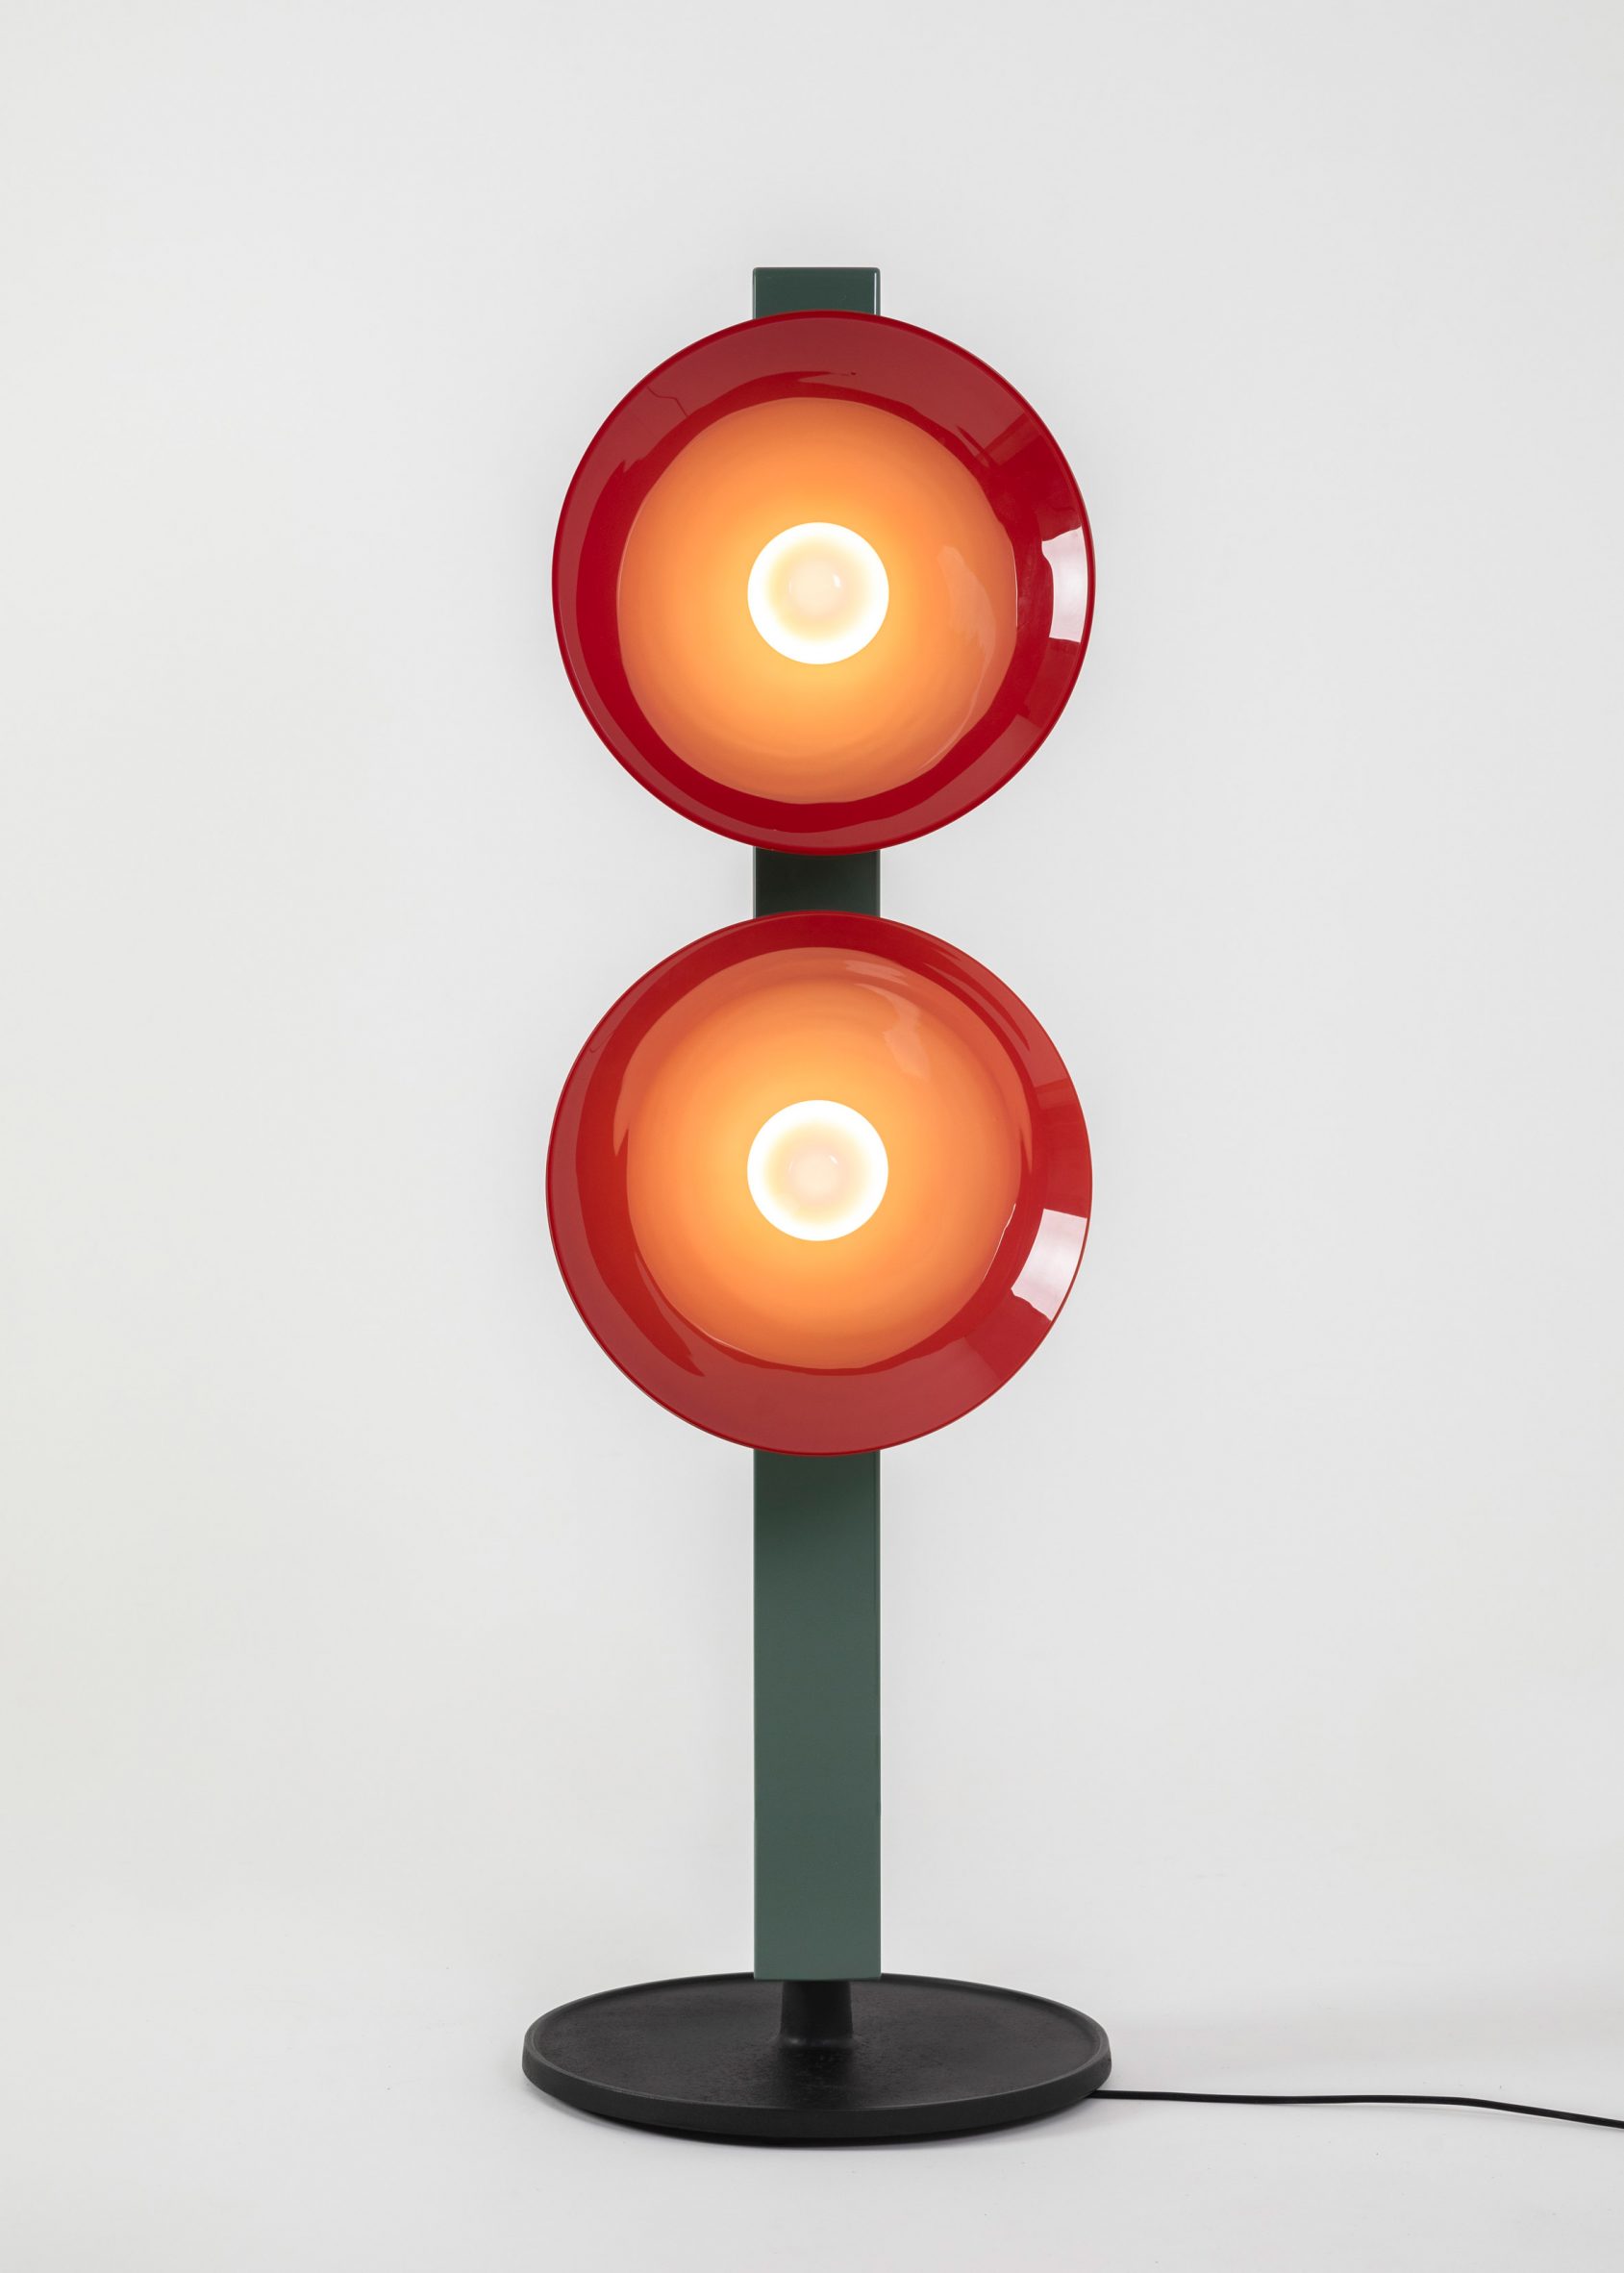 Signals floor lamp with red glass